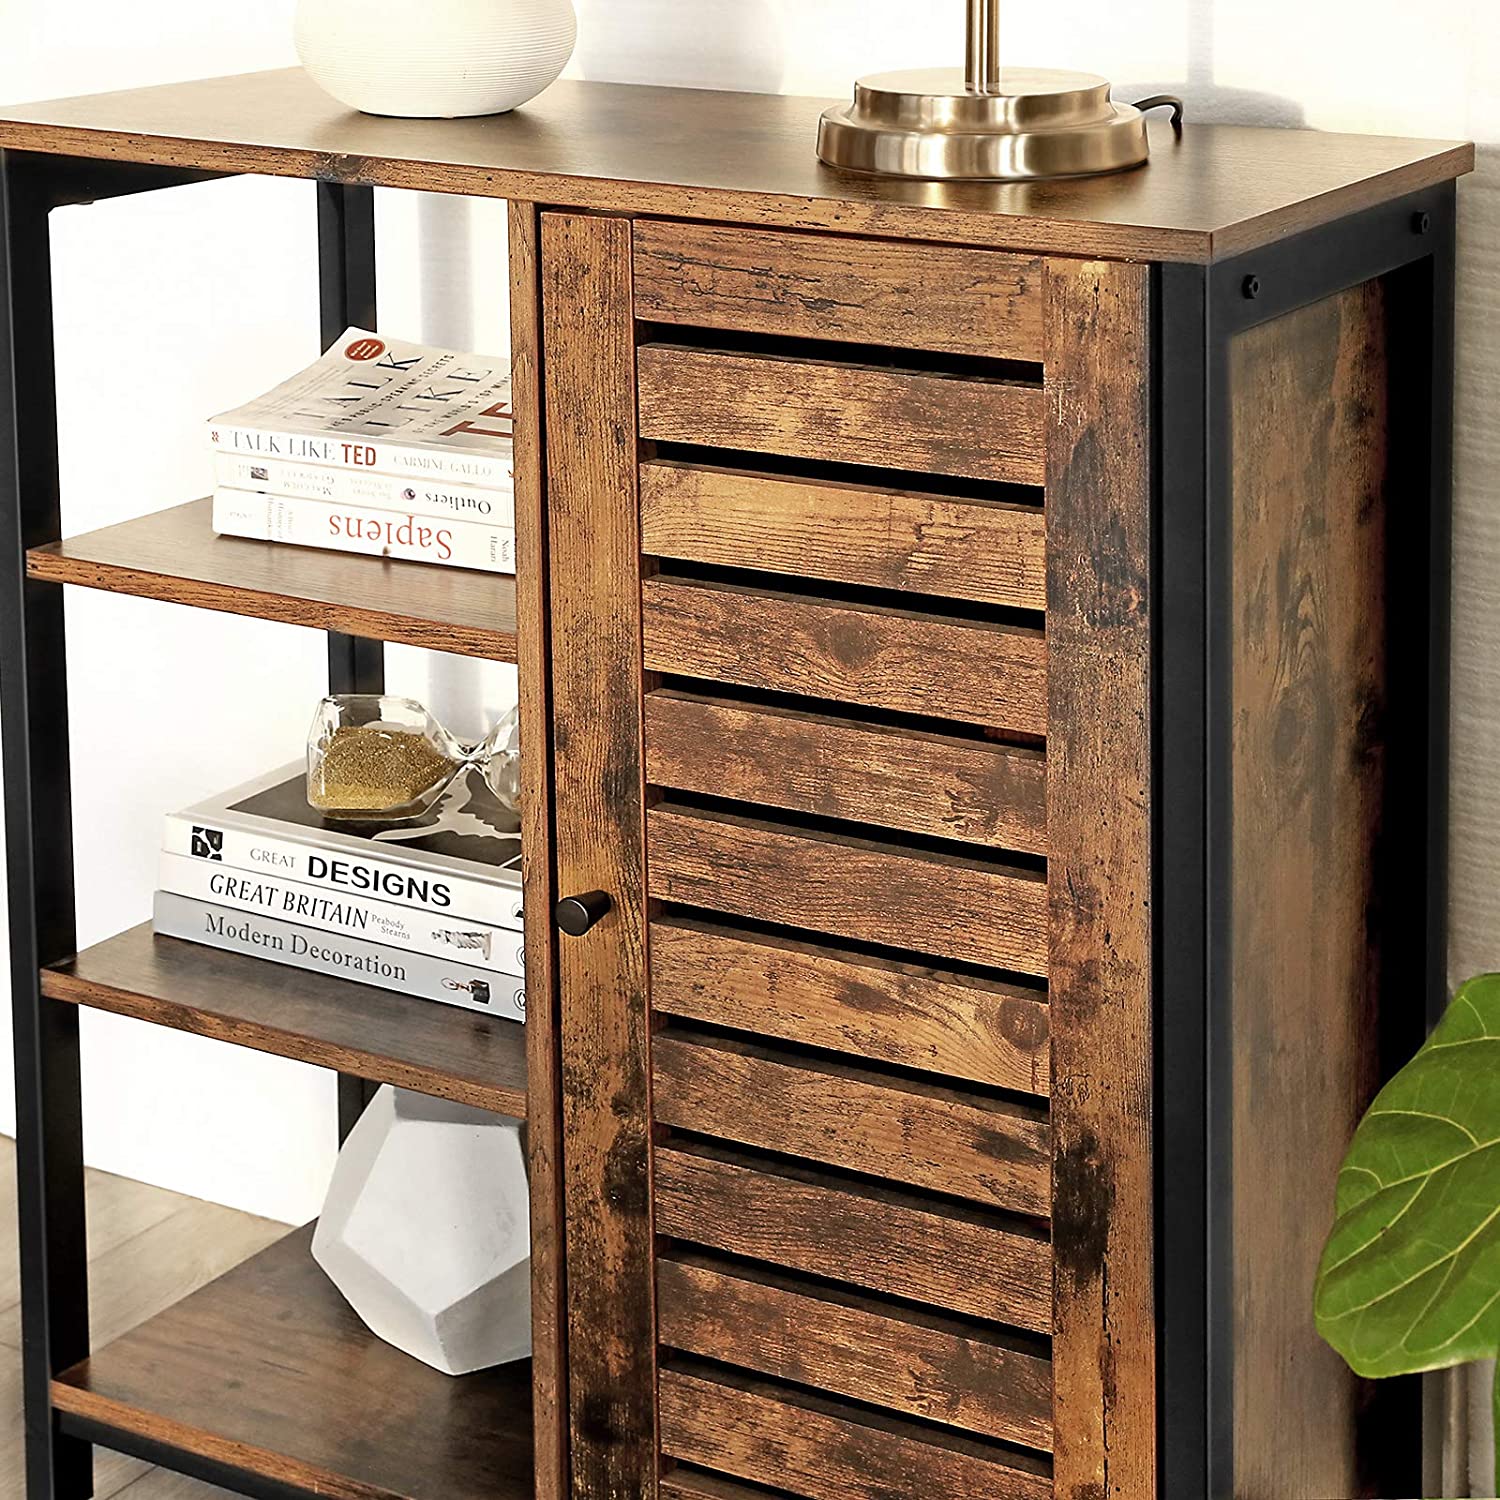 Storage Cabinet With 3 Shelves, Rustic Brown And Black